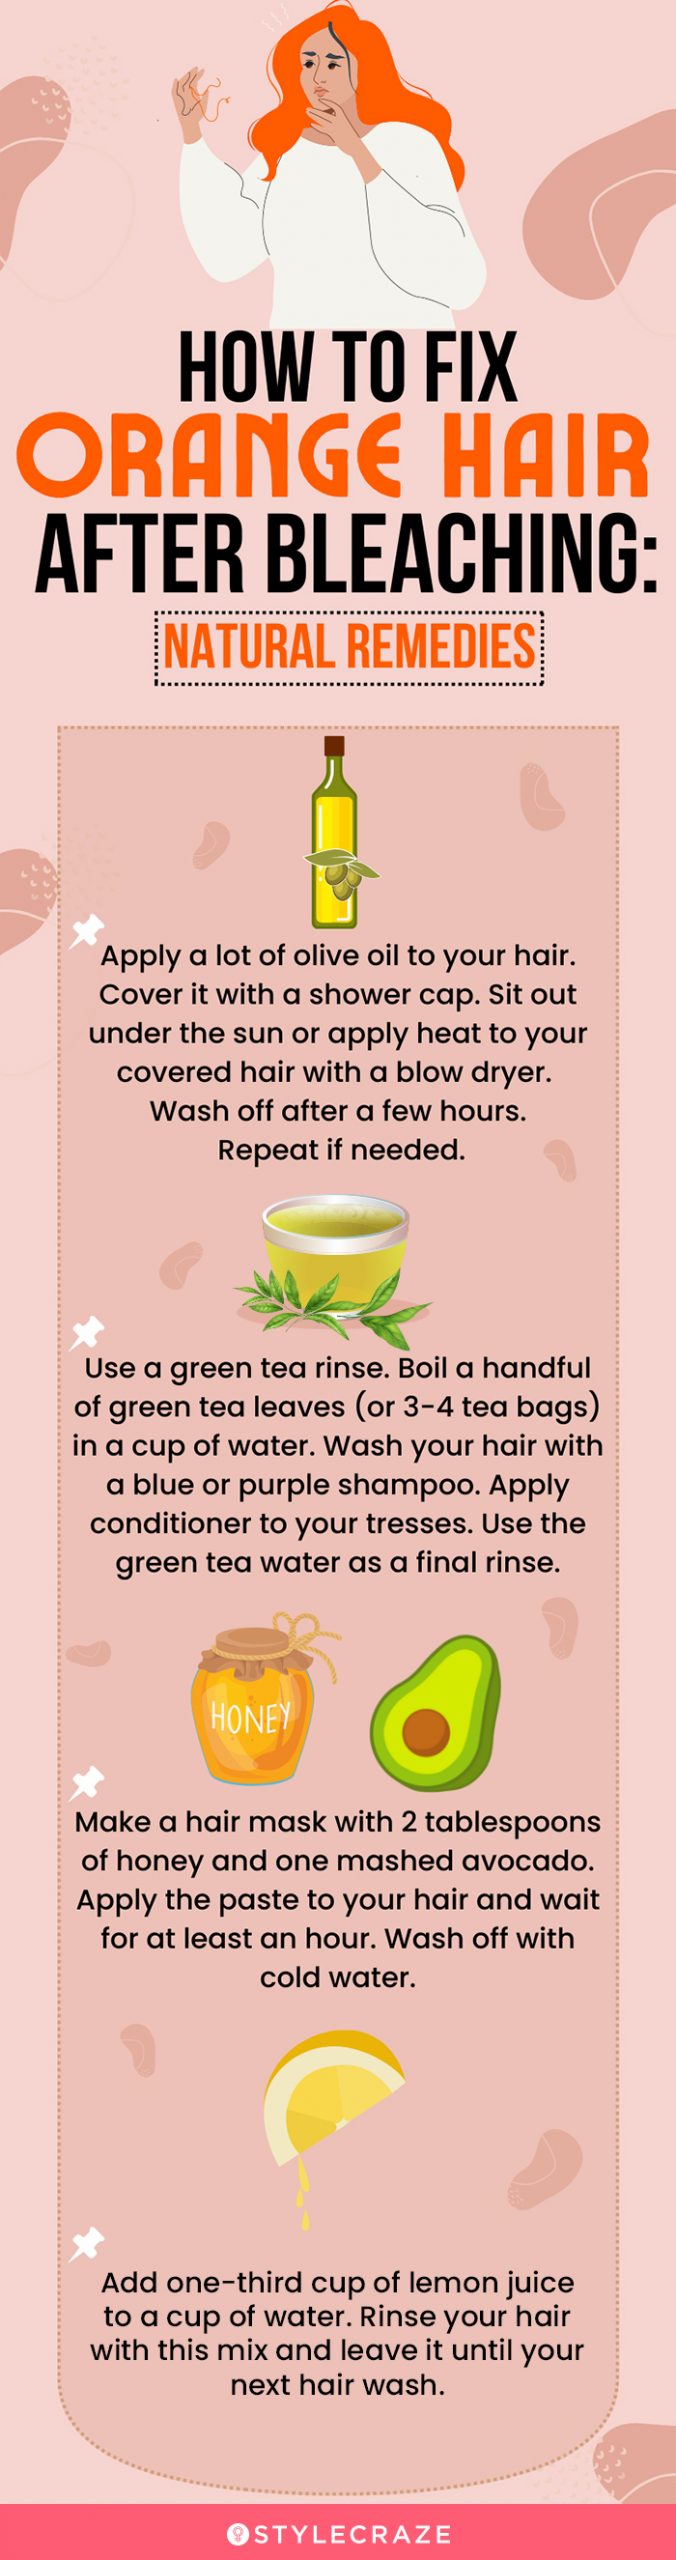 how to fix orange hair after bleaching (infographic)